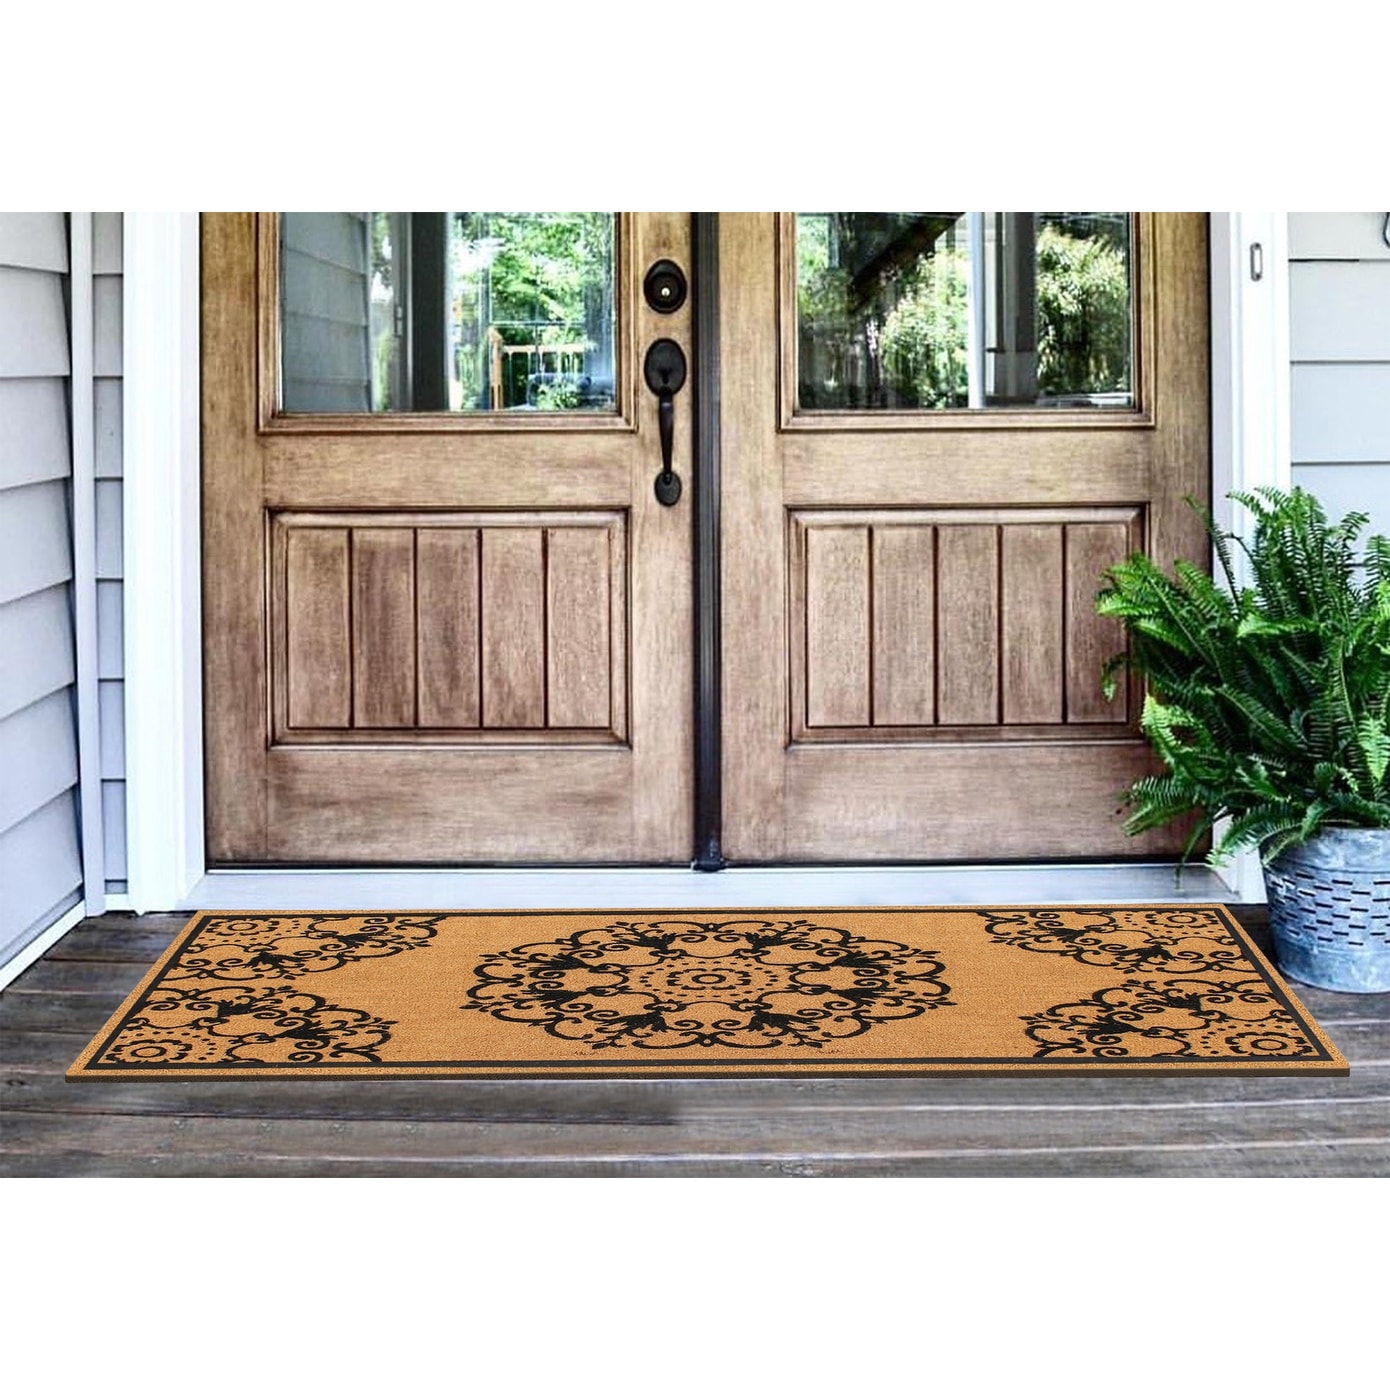 https://ak1.ostkcdn.com/images/products/is/images/direct/5294b0838a28b07246c27419026adc517245404c/A1HC-Natural-Coir-Flock-Door-Mat-for-Front-Door%2C-36x72%2C-Anti-Shed-Treated-Durable-Double-Door-Entrance-Doormat.jpg